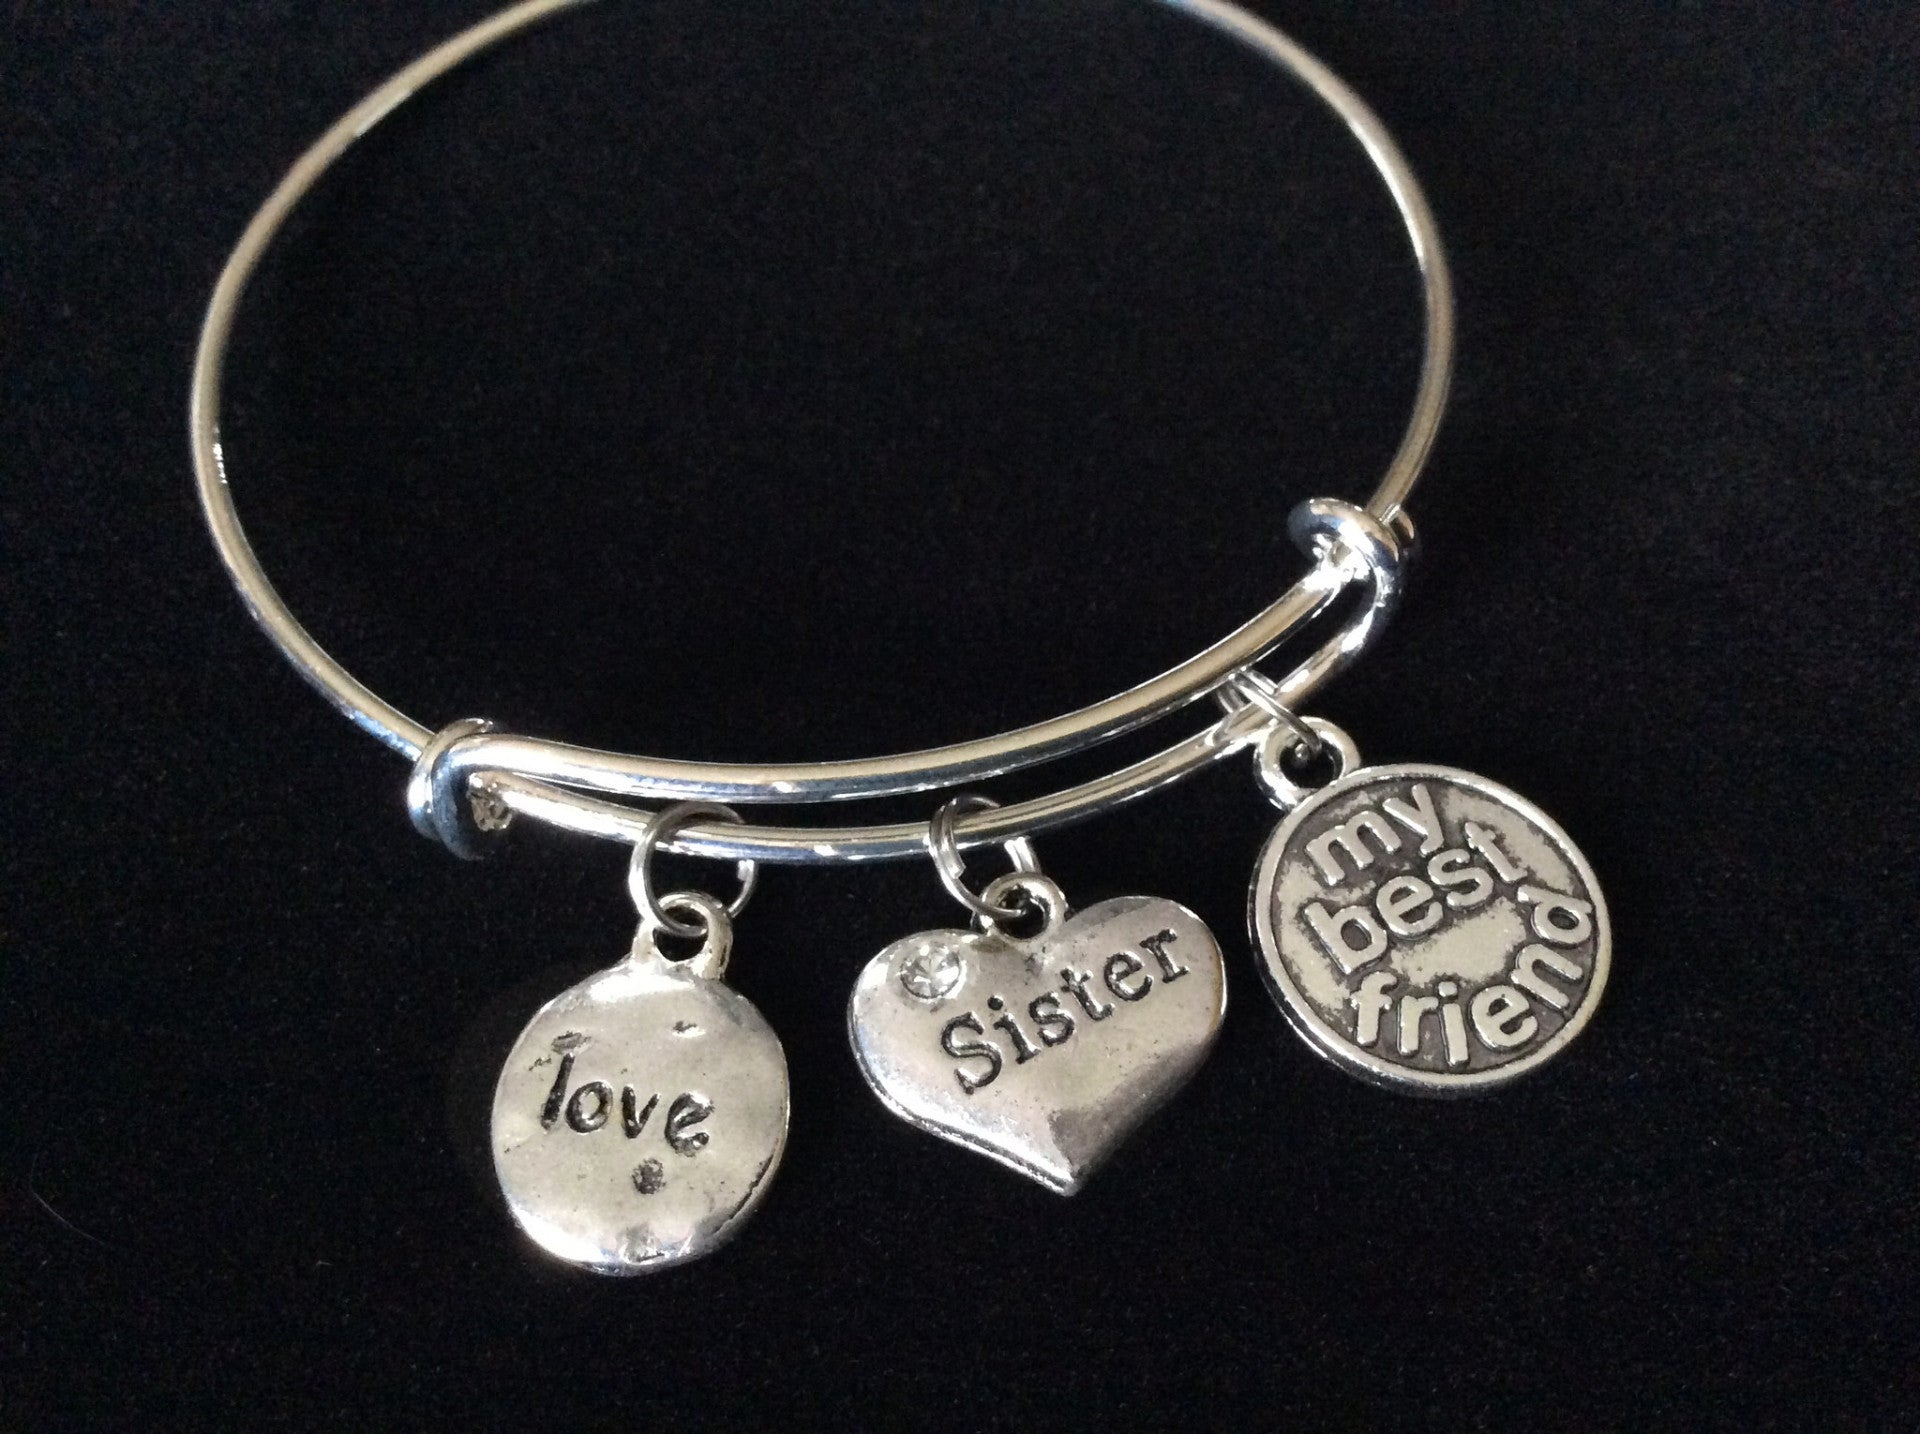 Best Friends Connected by The Heart Silver Expandable Charm Bracelet Adjustable Bangle Trendy Gift BFF